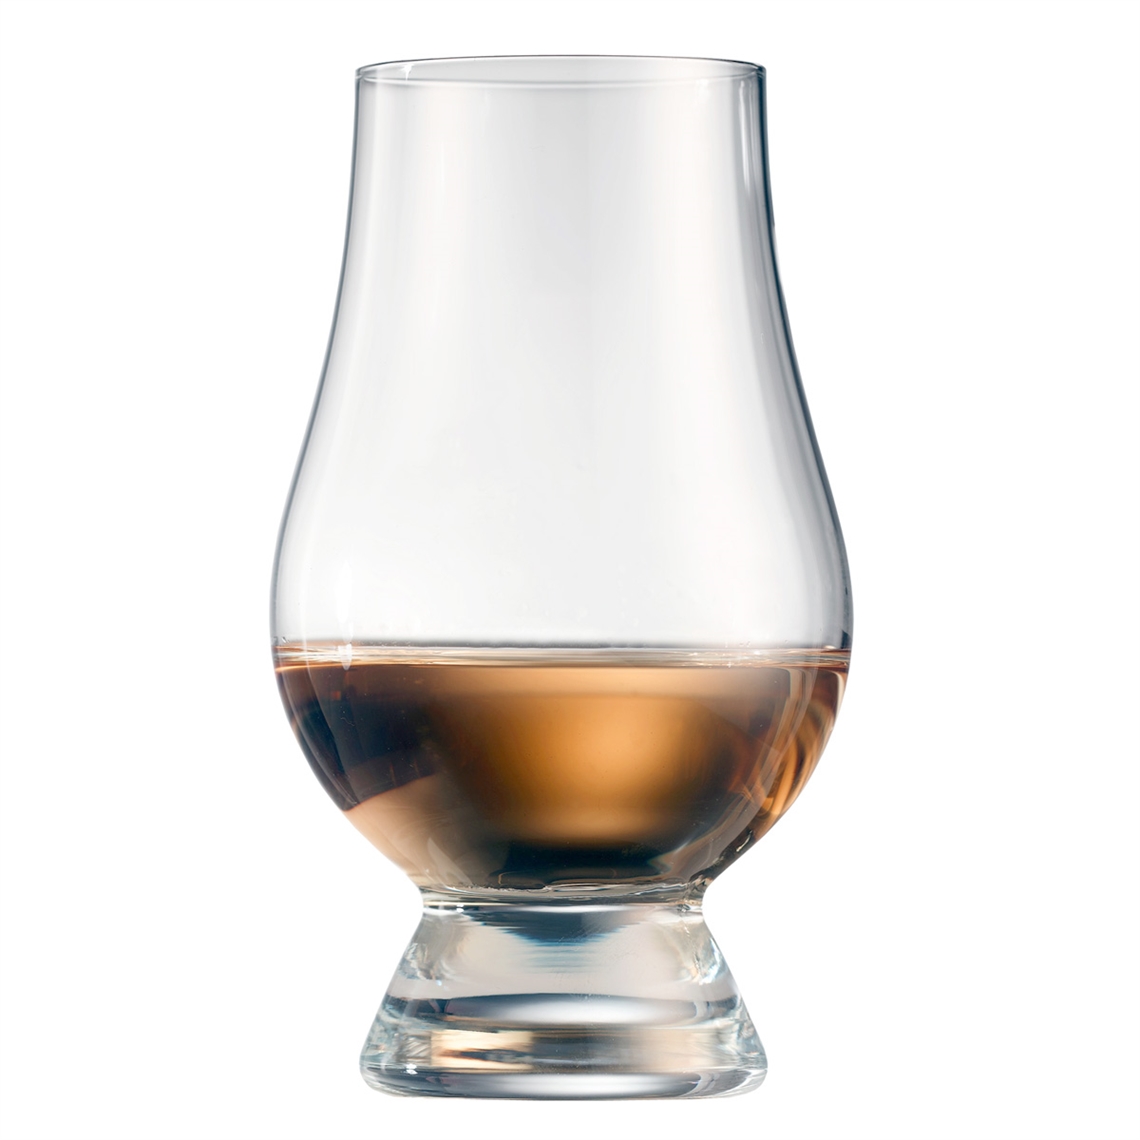 View more glassware from our Whisky Glasses range